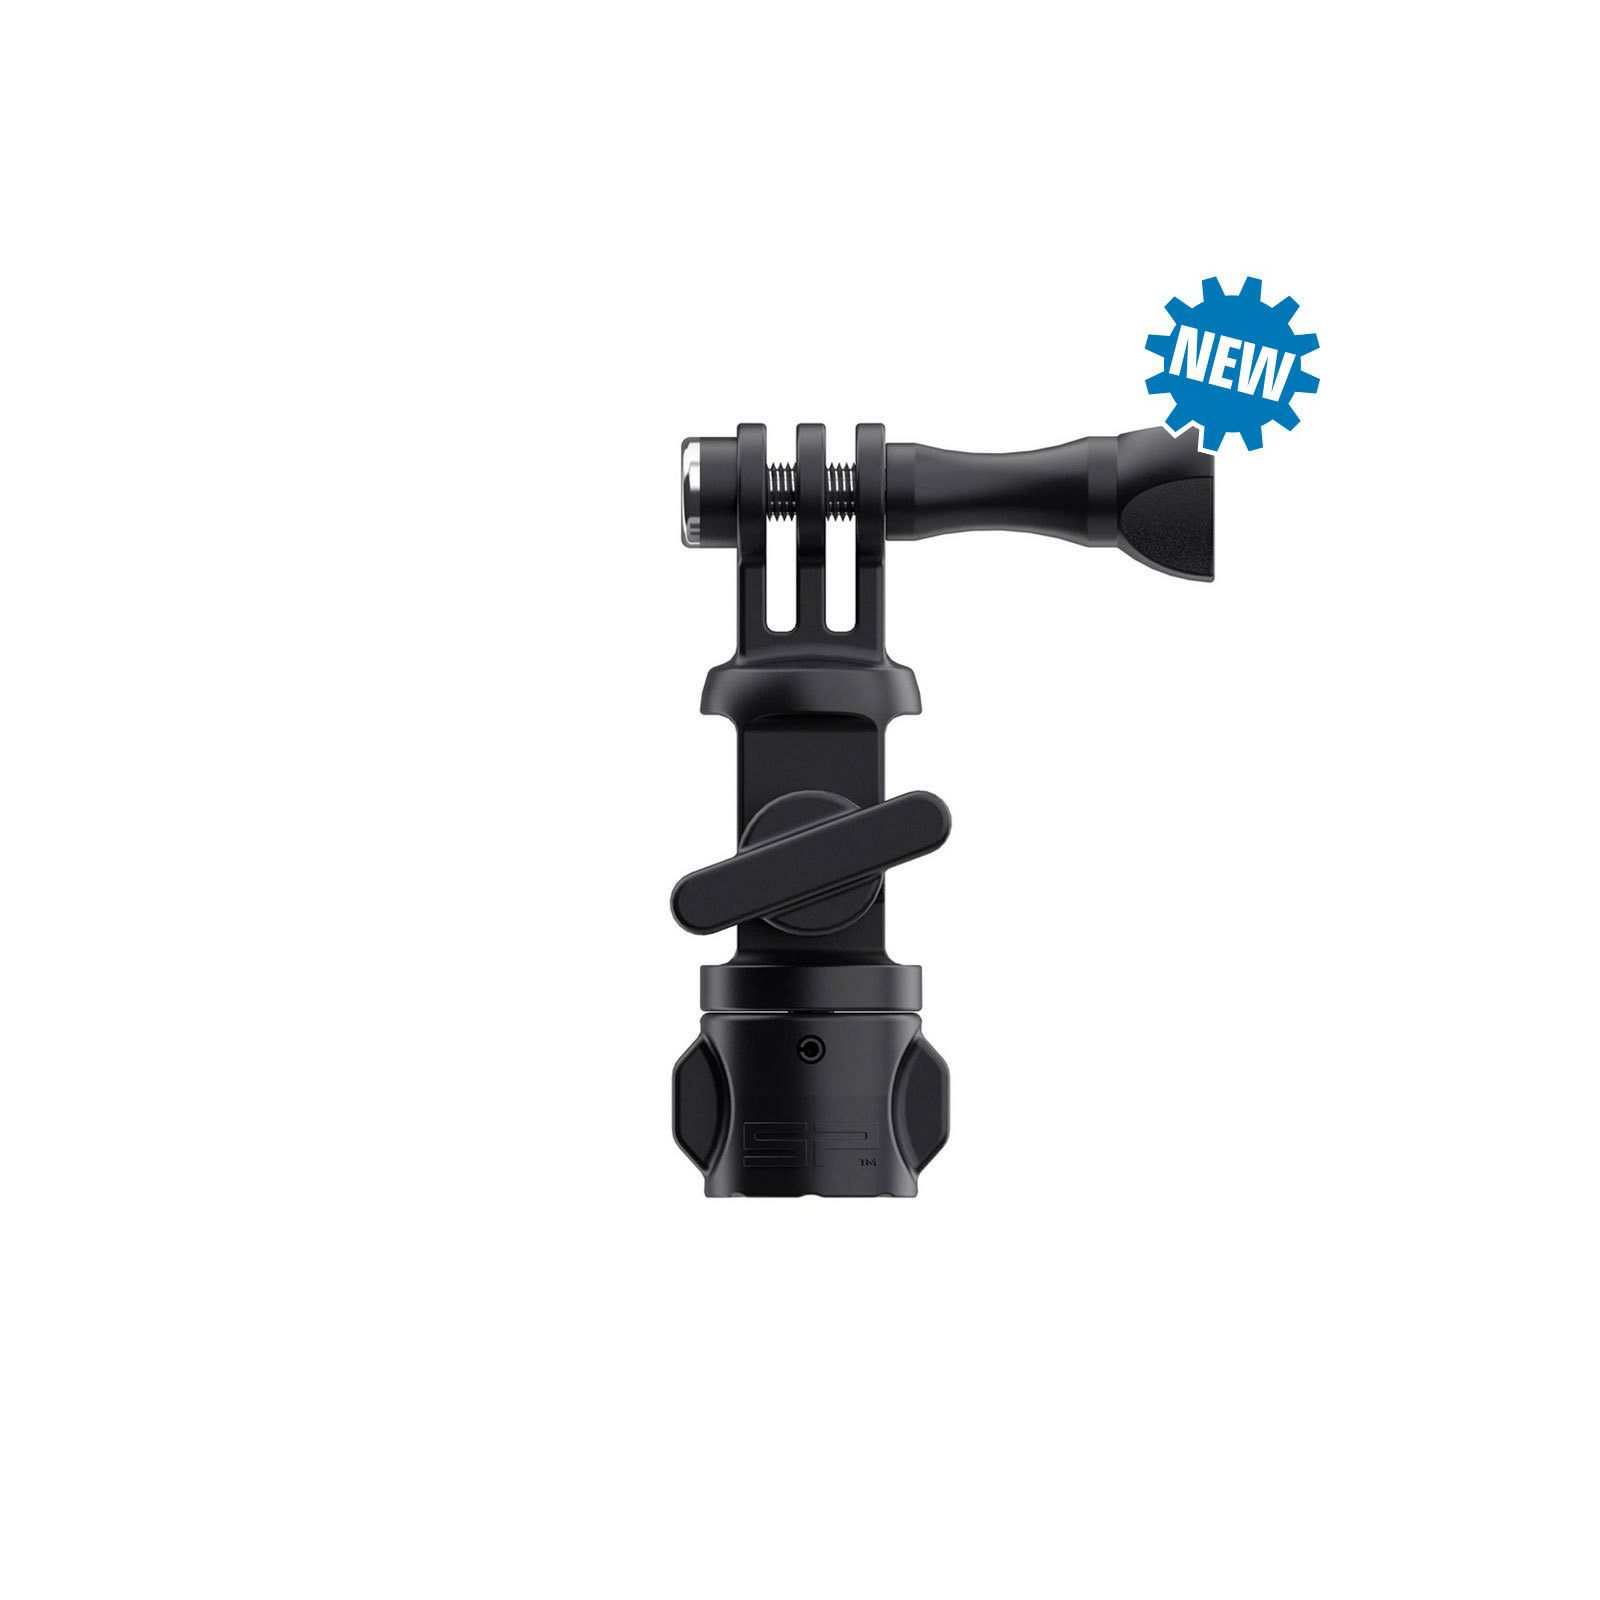 SP Gadgets SP SECTION SWIVEL HEAD size  SKU 53117 Floating section system